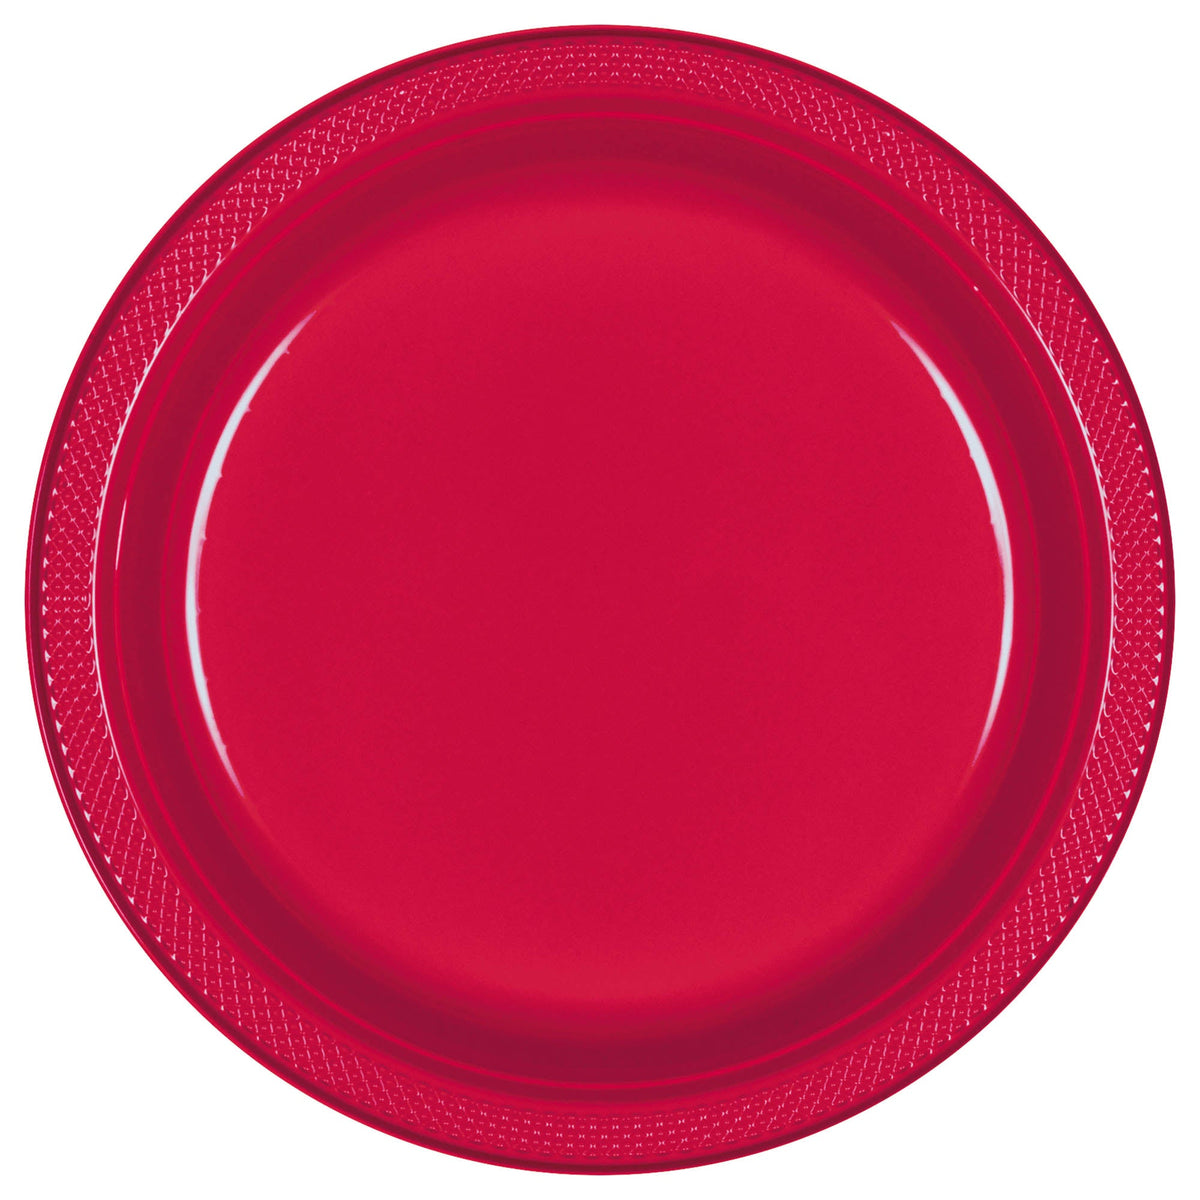 Apple Red 10" Round Plastic Plates, 20 count